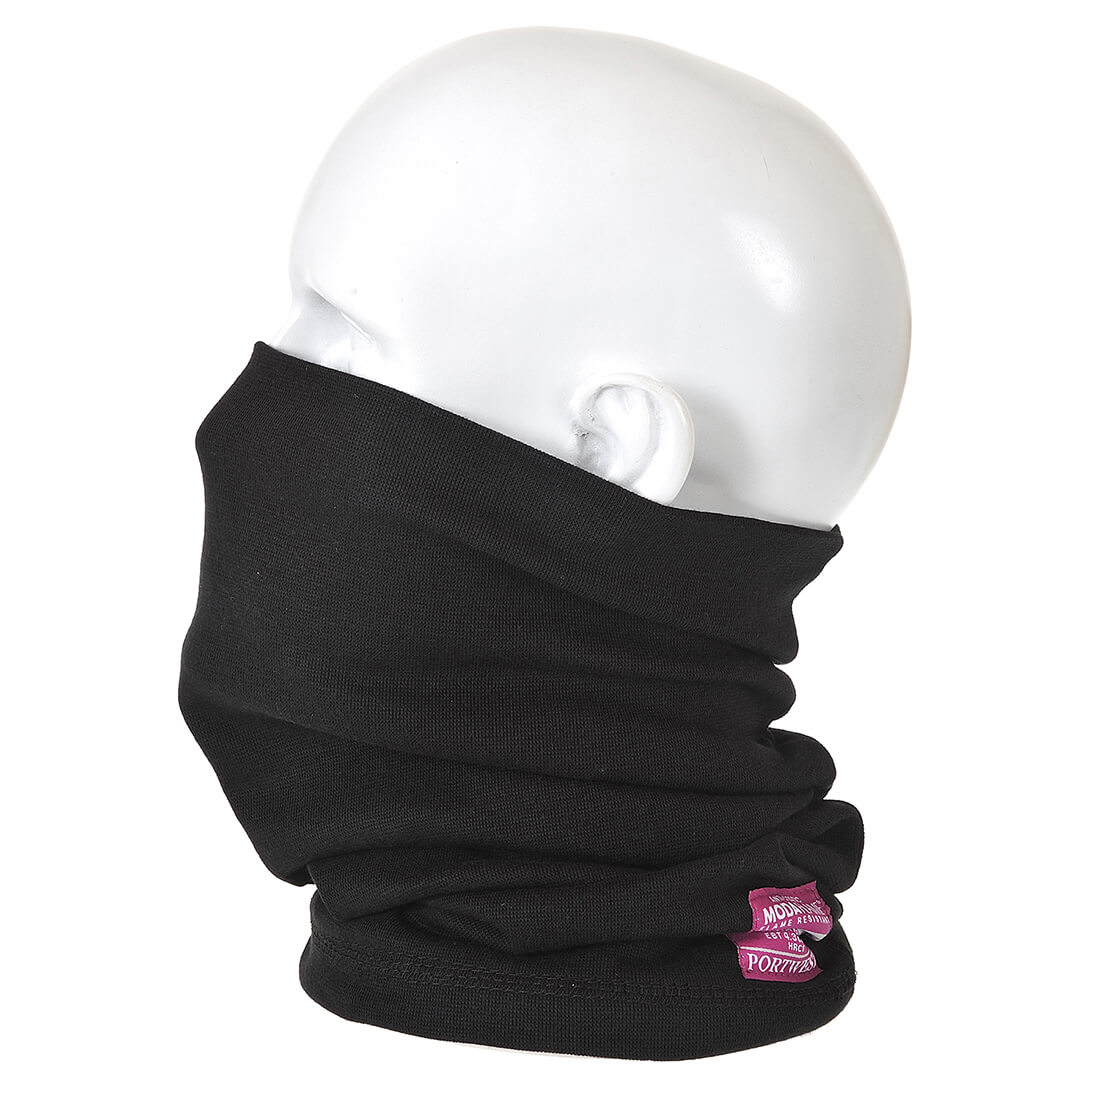 Image of Modaflame Flame Resistant Antistatic Neck Tube Black One Size